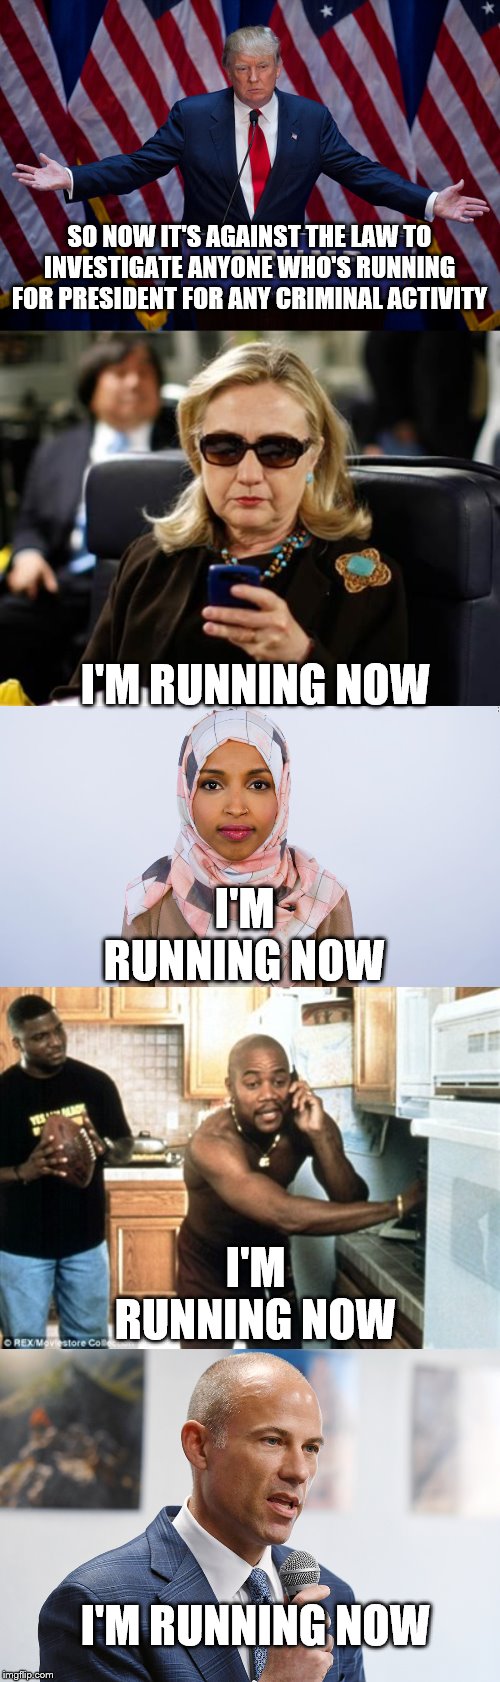 SO NOW IT'S AGAINST THE LAW TO INVESTIGATE ANYONE WHO'S RUNNING FOR PRESIDENT FOR ANY CRIMINAL ACTIVITY; I'M RUNNING NOW; I'M RUNNING NOW; I'M RUNNING NOW; I'M RUNNING NOW | image tagged in memes,hillary clinton cellphone,donald trump,show me the money cuba gooding,ilhan omar | made w/ Imgflip meme maker